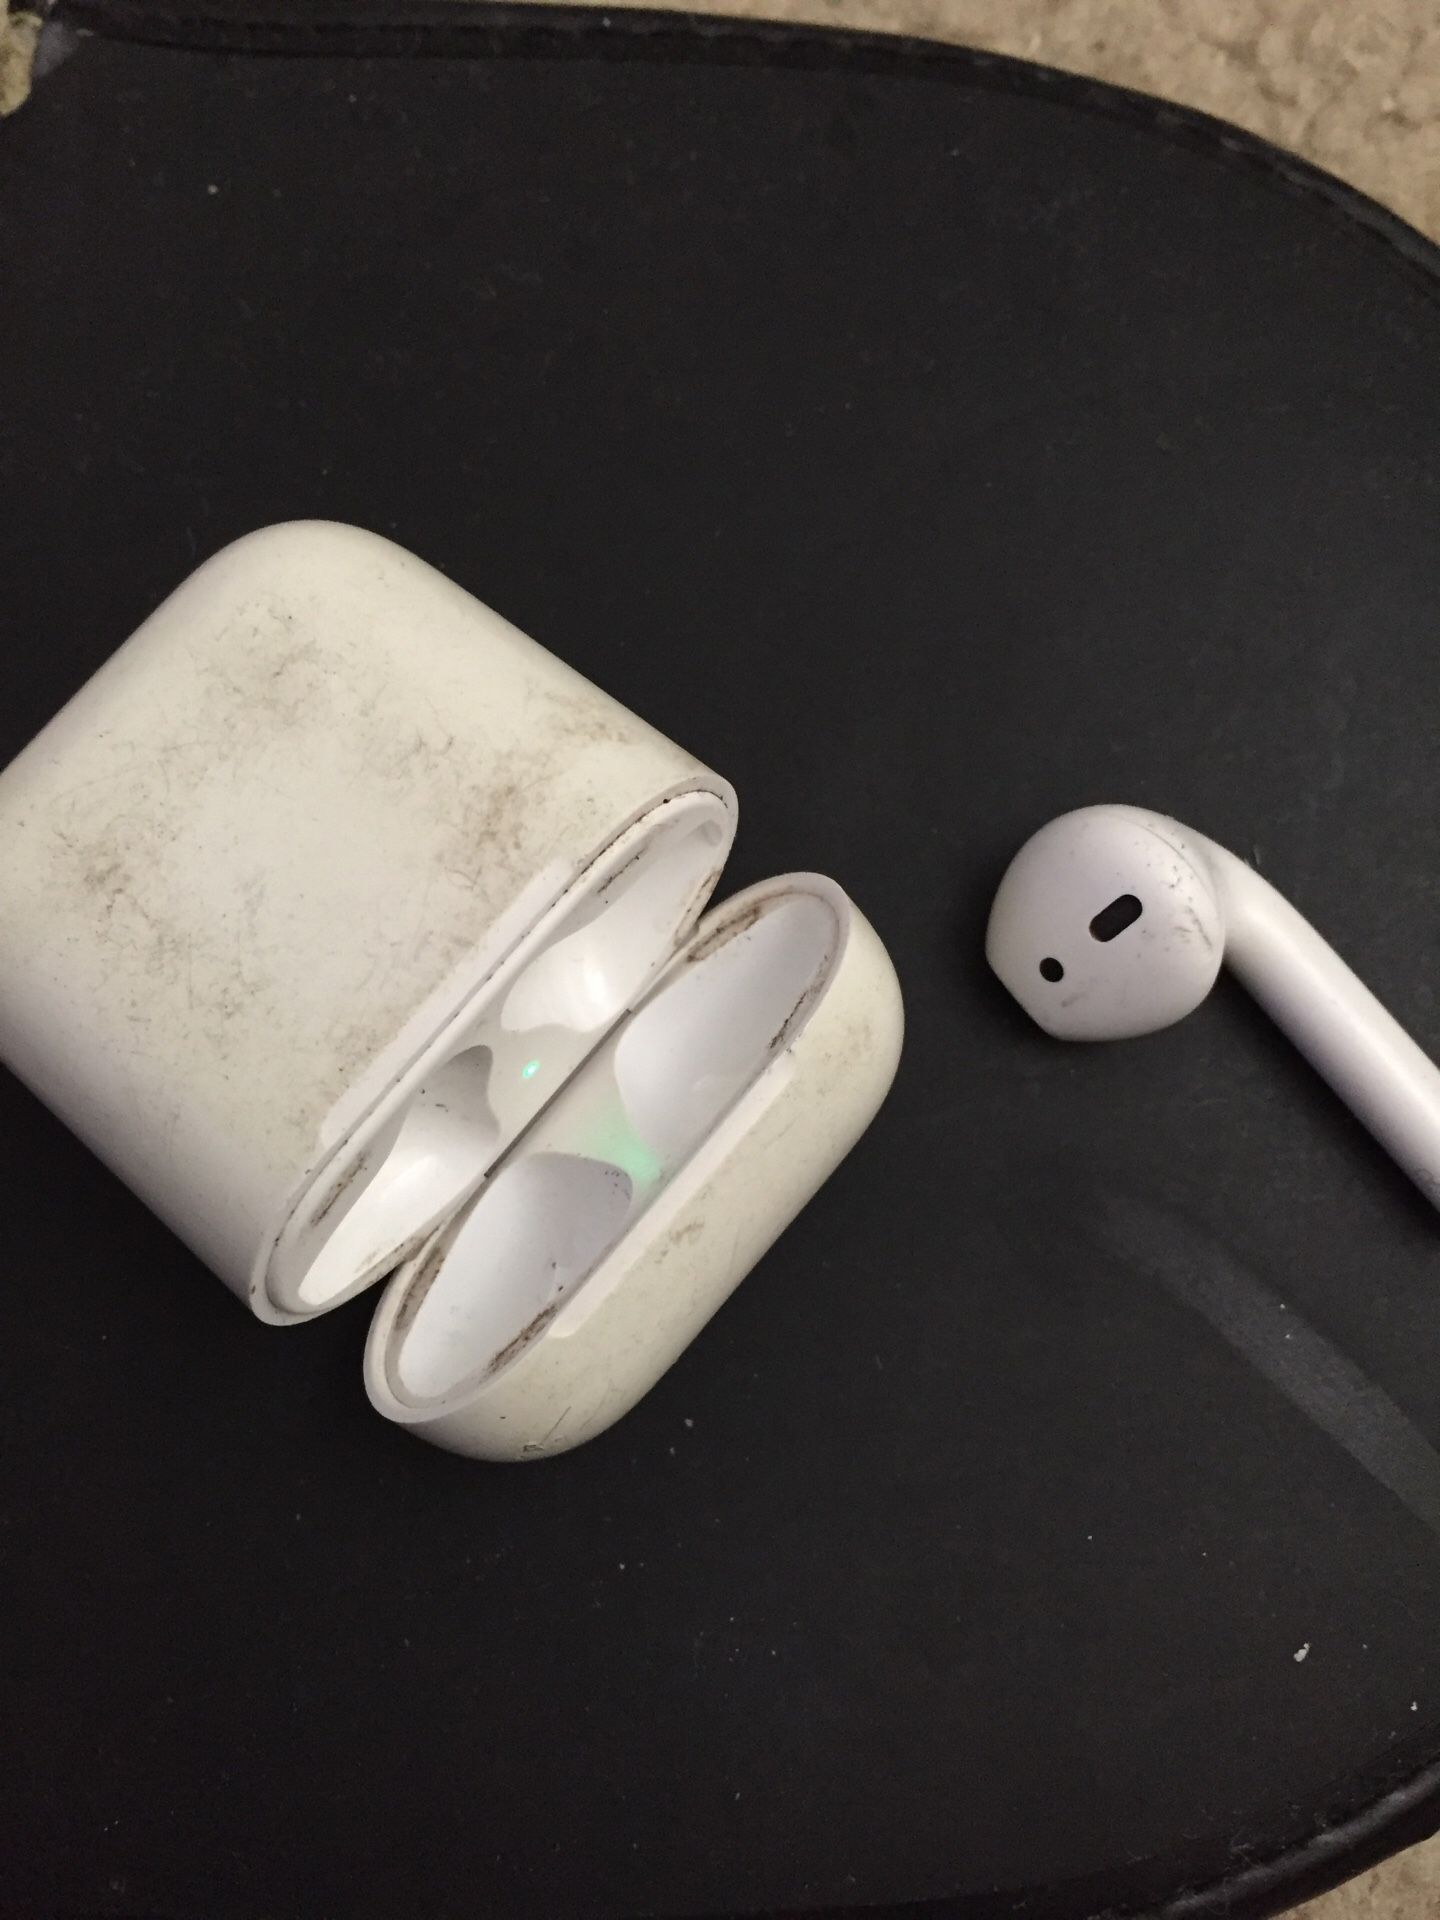 Ear Pods With One Earphone (right ear)